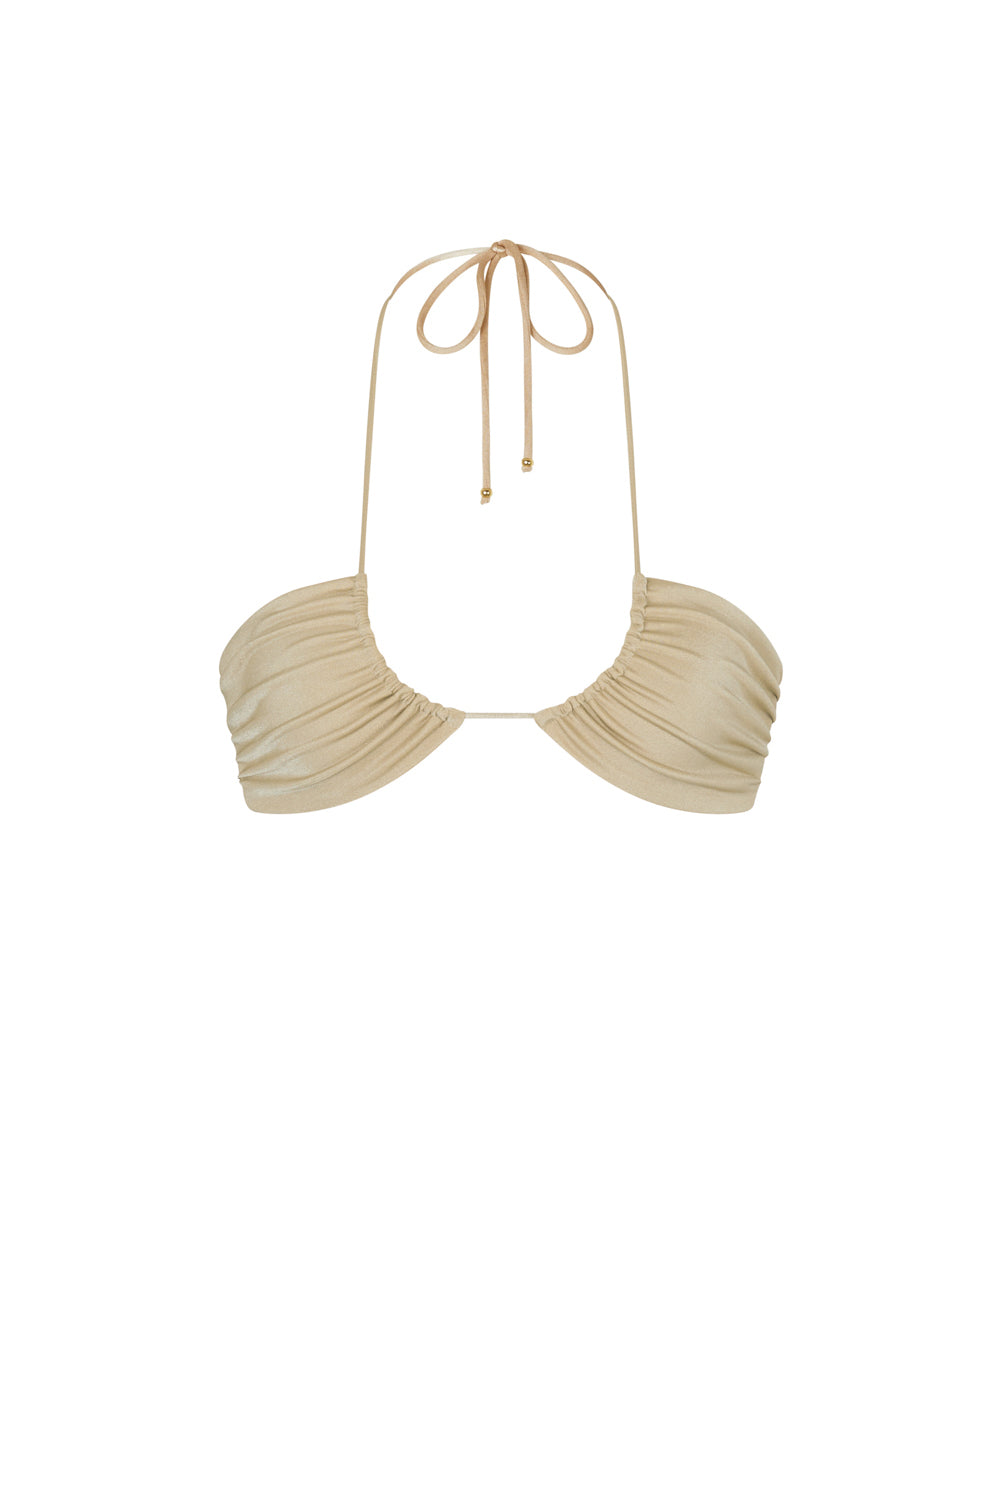 flook the label malani top swimwear gold product image front